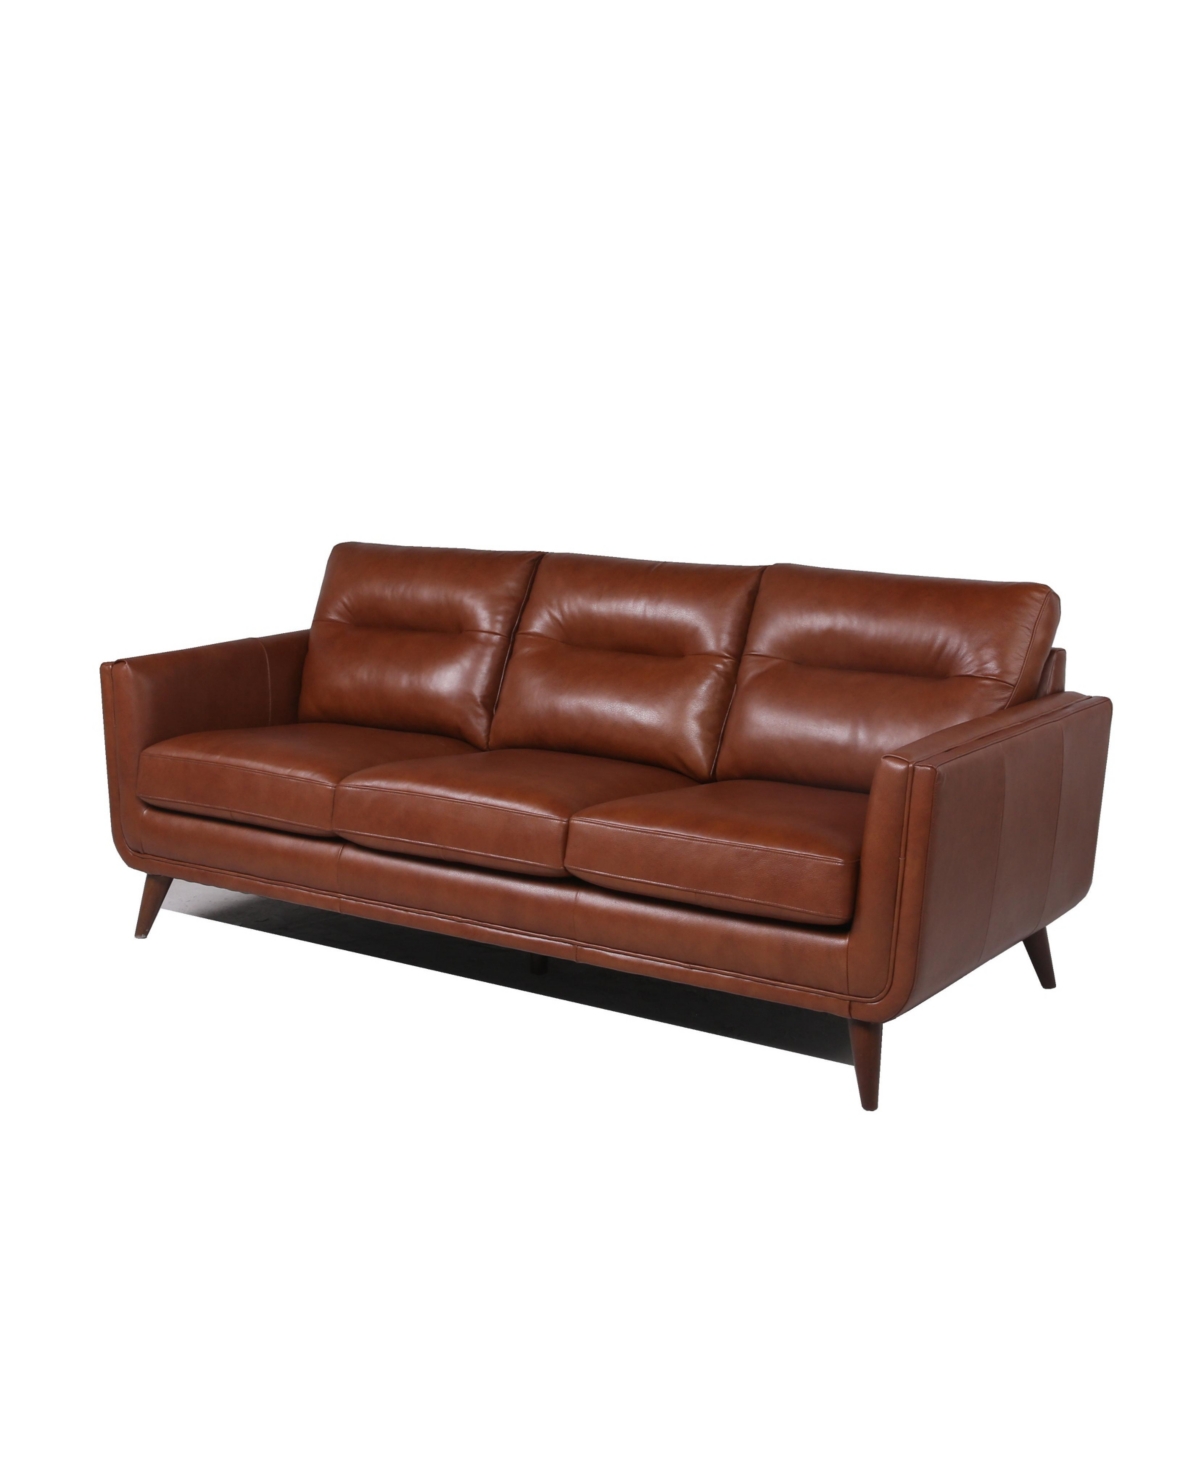 Nice Link Ava 84" Mid-century Modern Leather Sofa In Camel Brown